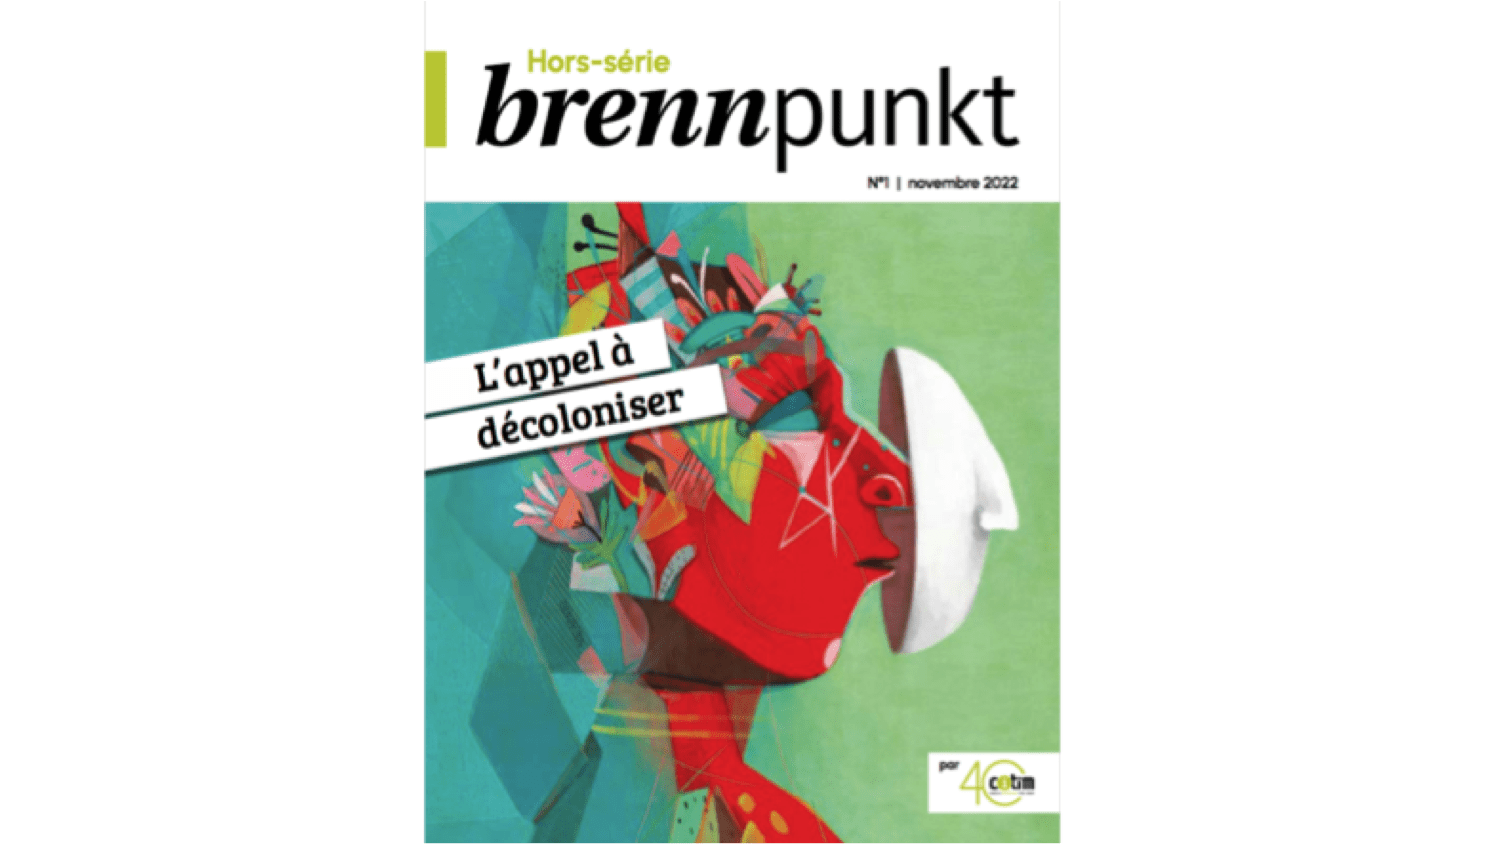 Hors-série Brennpunkt nº1 : The Call to Decolonize     (in English)